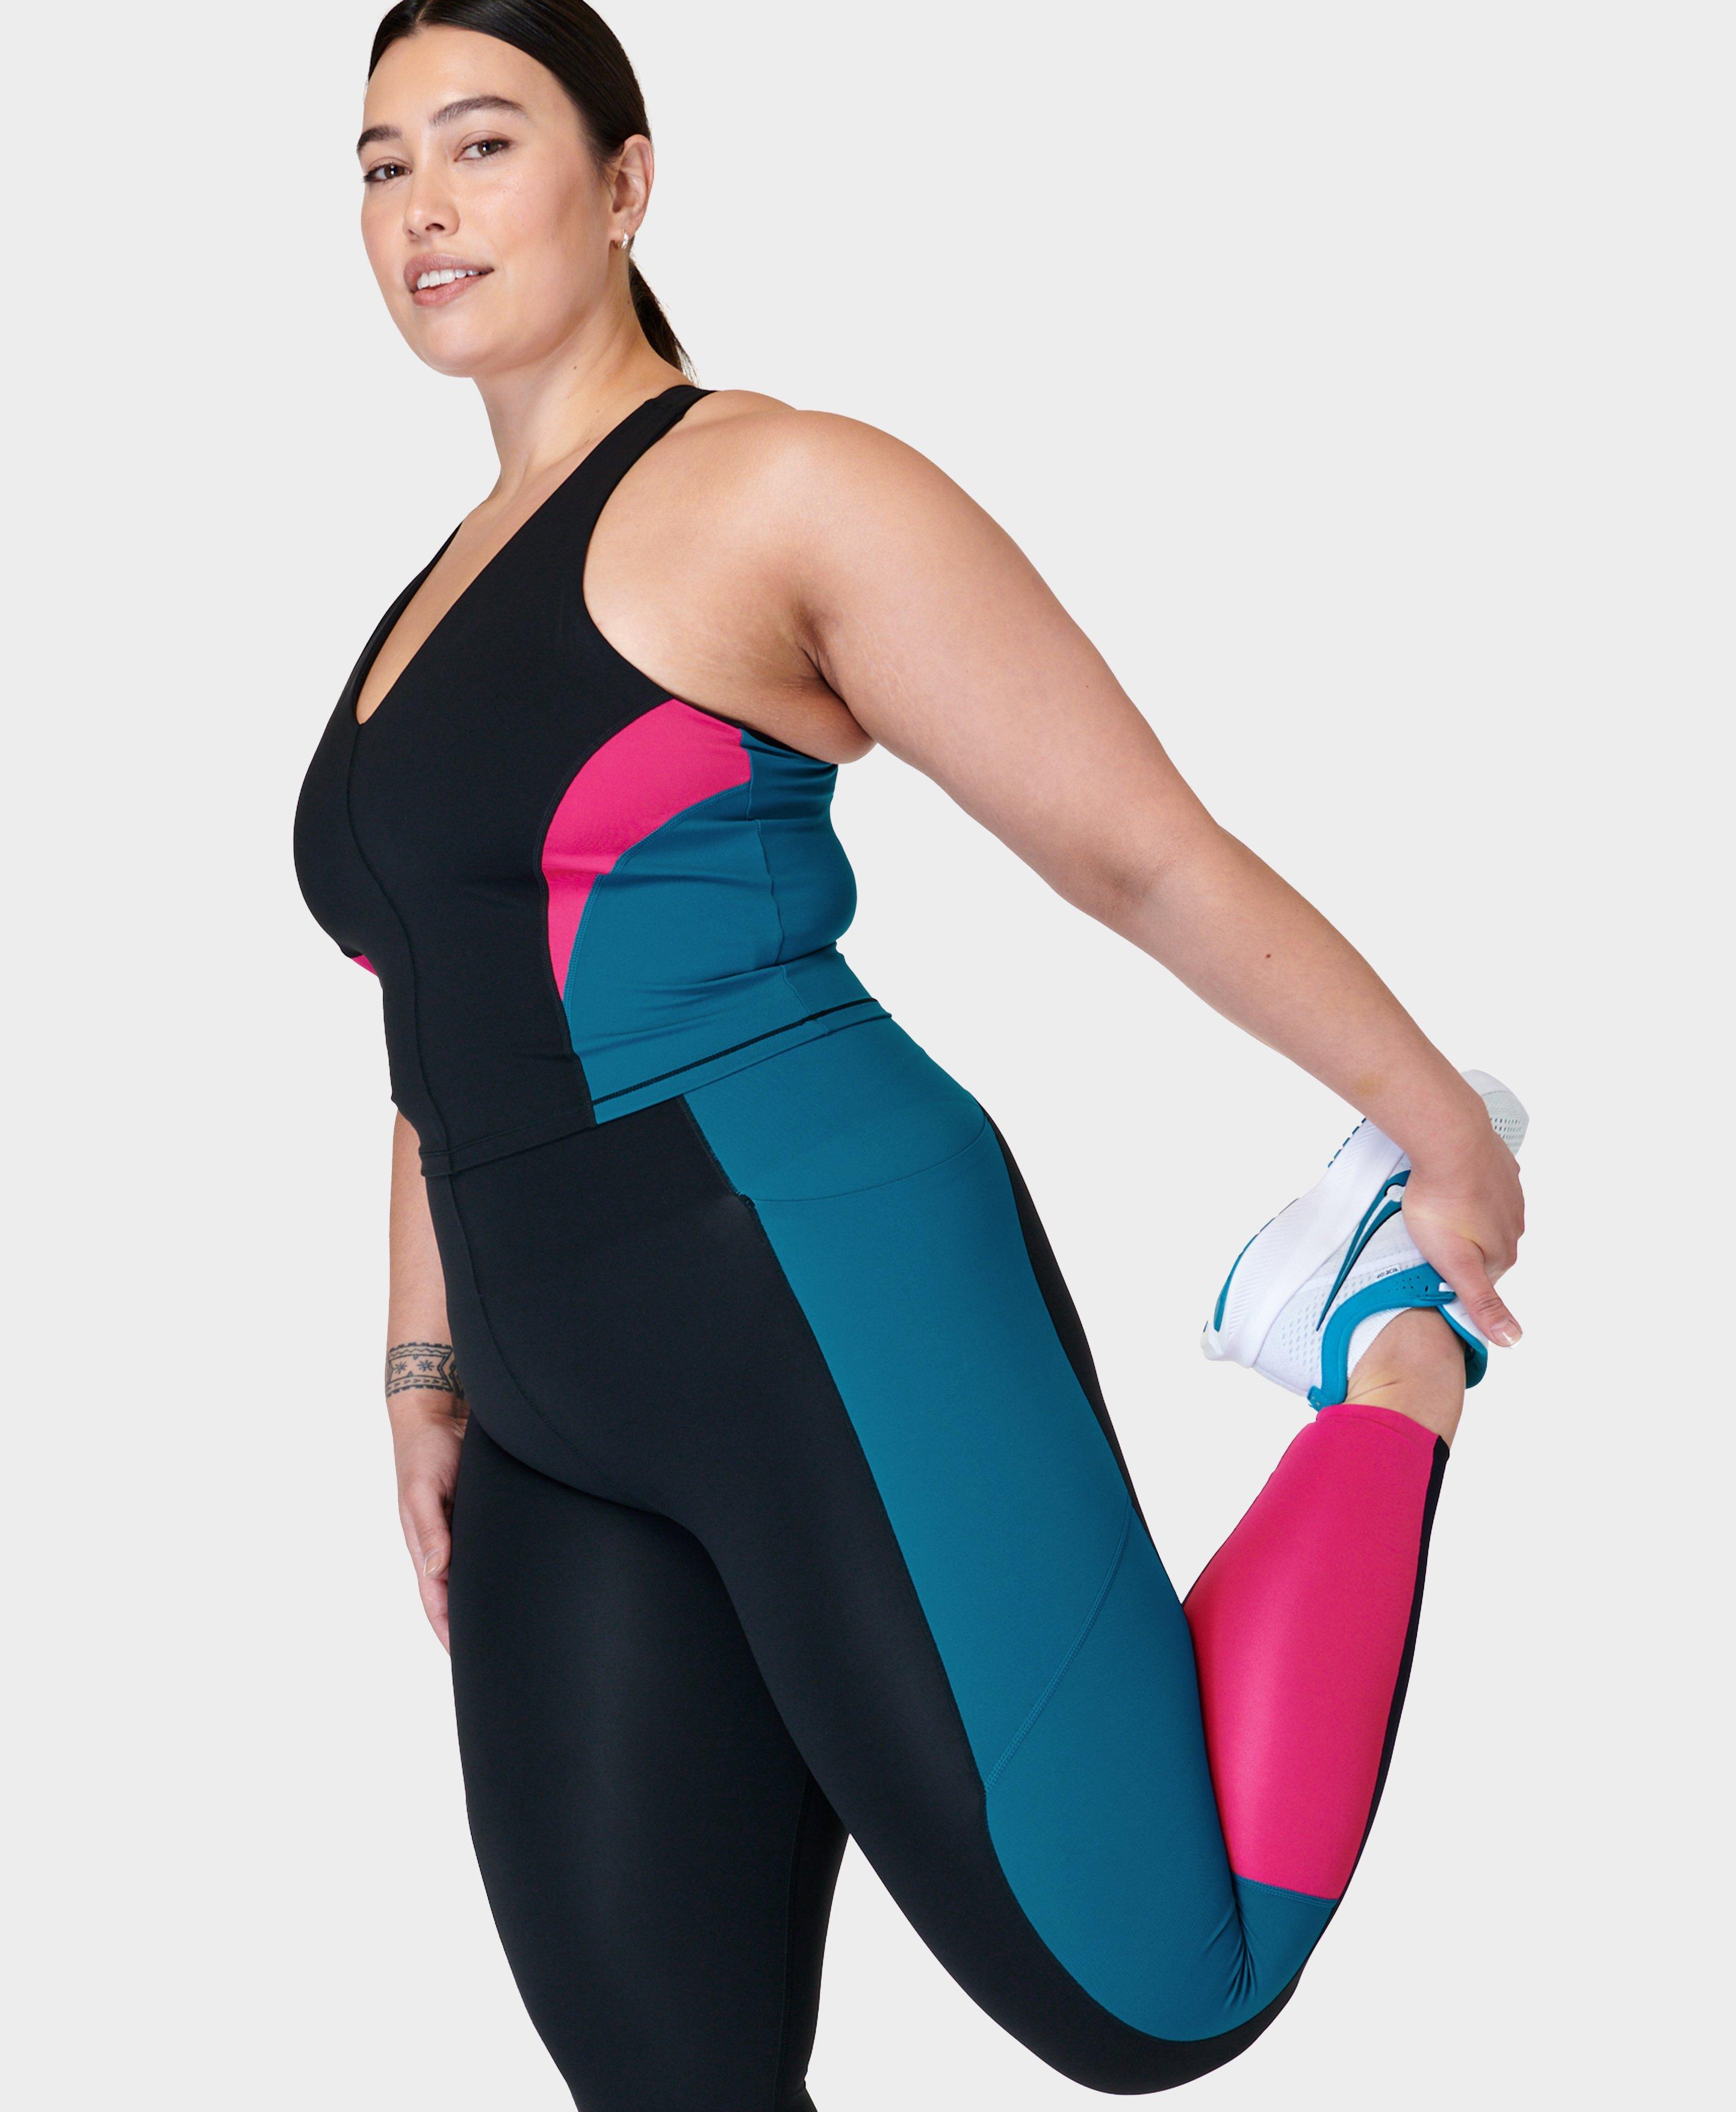 Stay cool and stylish with our Black Colour Block Thermodynamic Run Leggings